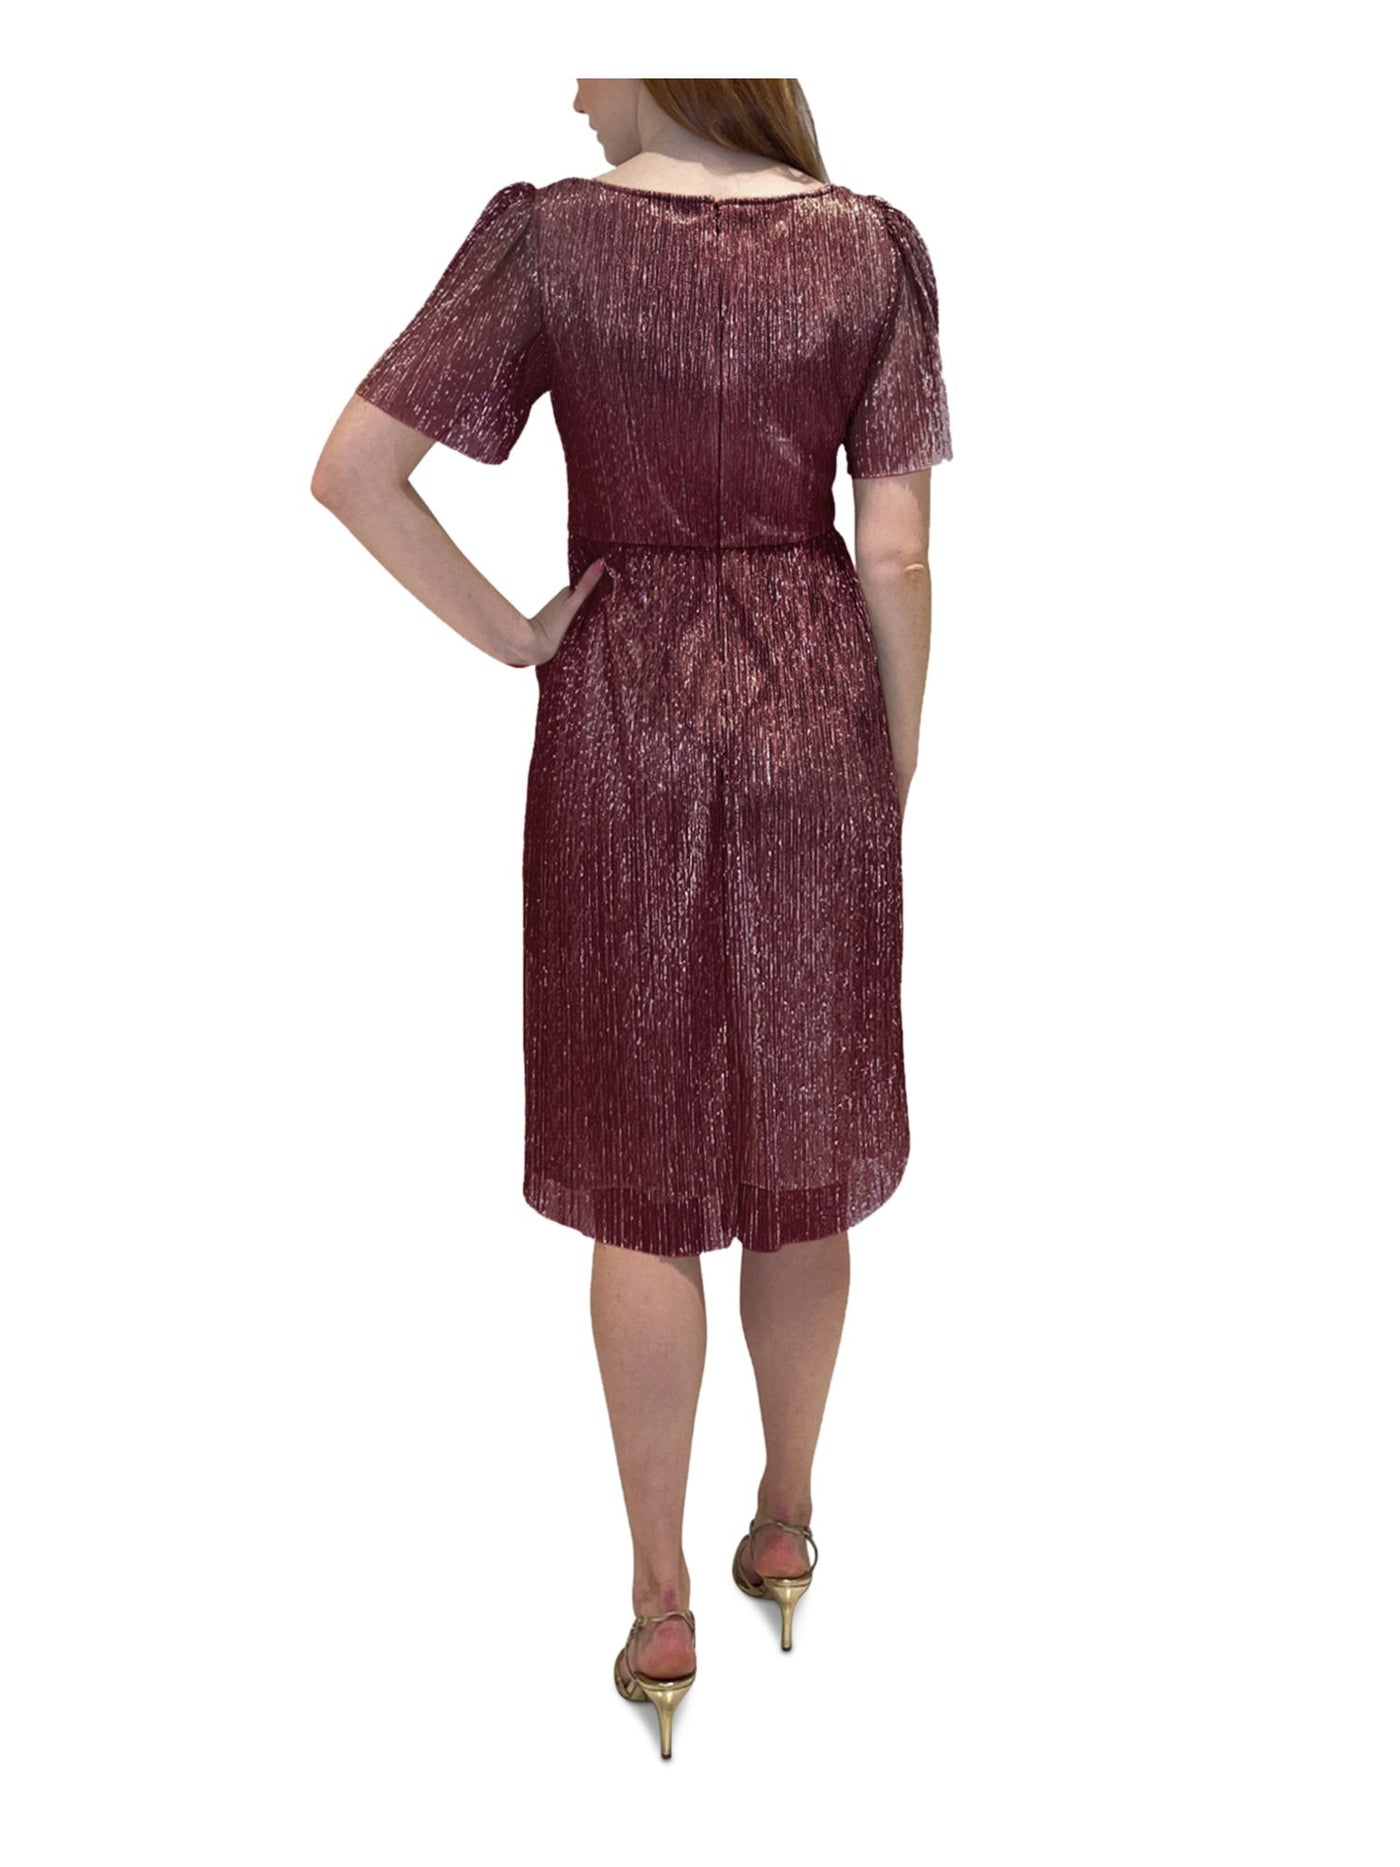 ADRIANNA PAPELL Womens Burgundy Sheer Pleated Tile Waist Lined Short Sleeve Keyhole Above The Knee Party Shift Dress 8